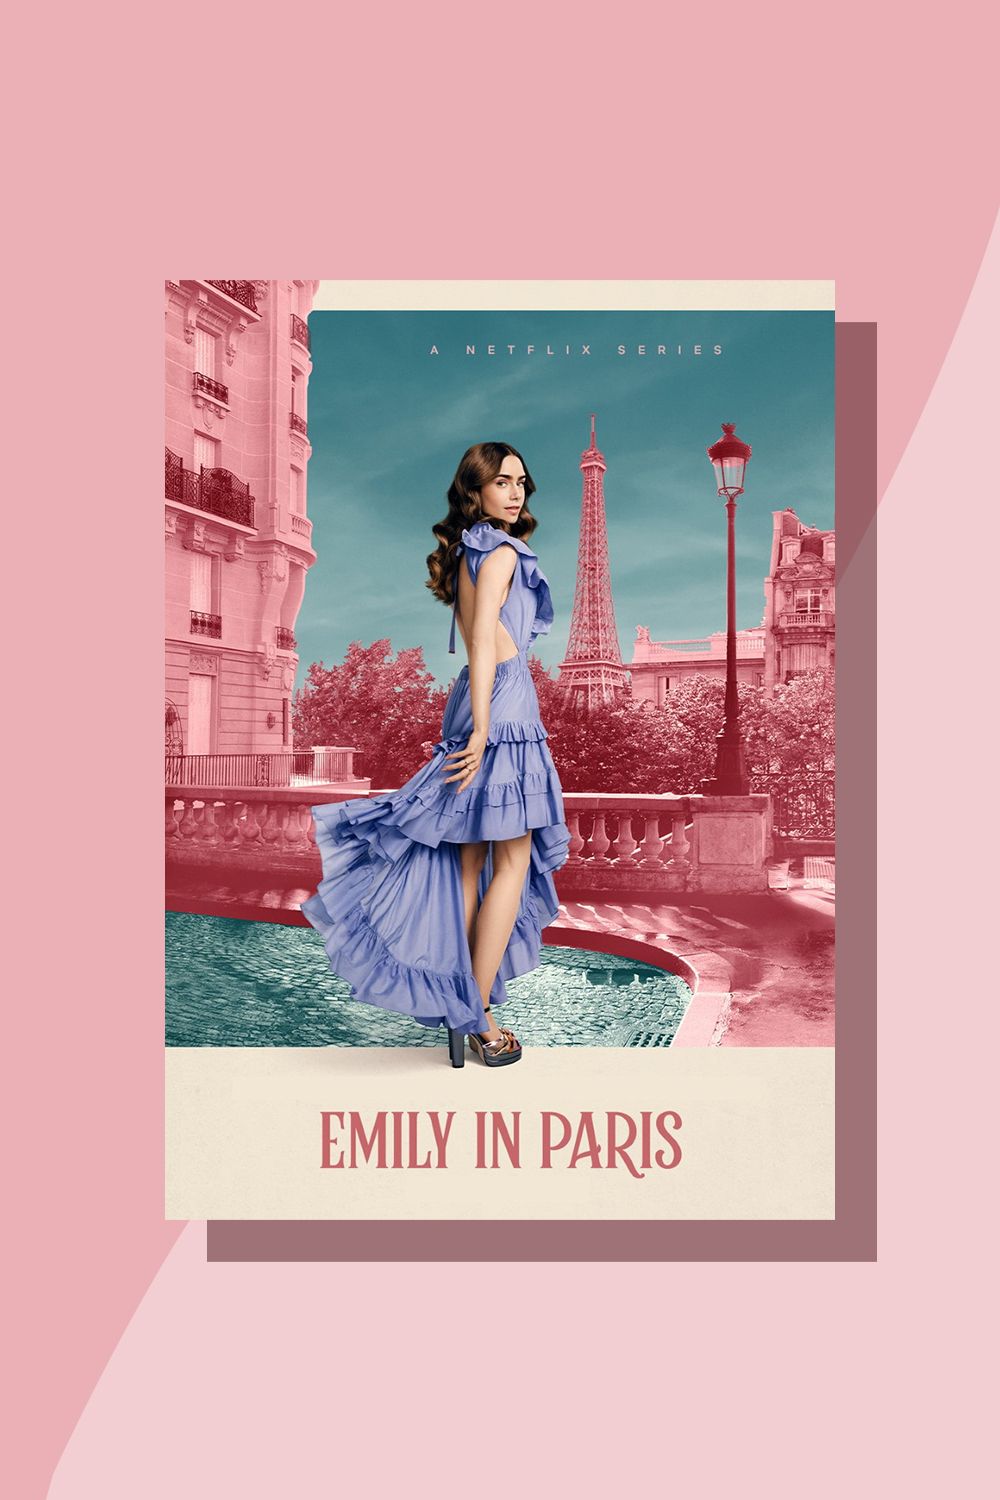 Emily in Paris': The 5 Best Characters on the Show